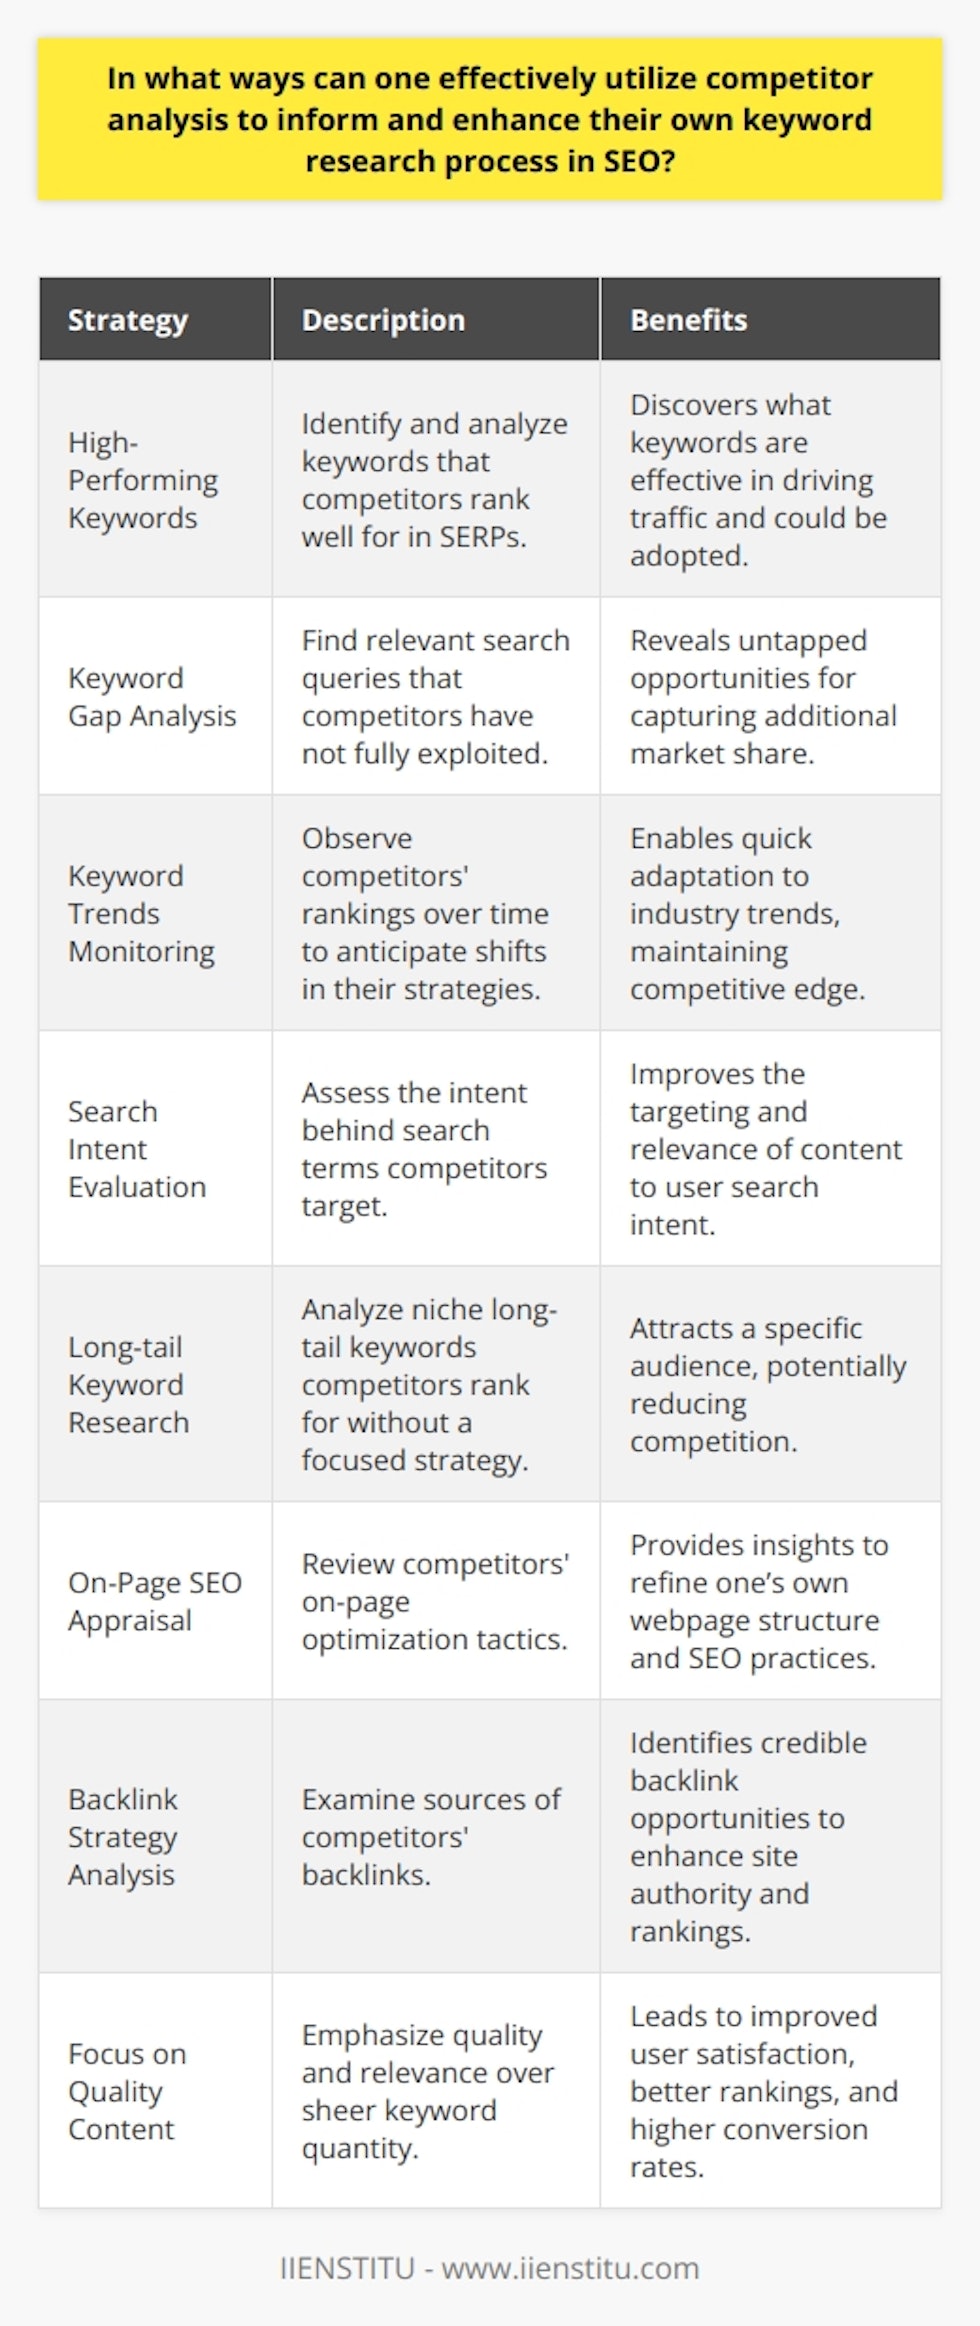 Competitor analysis is a critical component in shaping an effective SEO and keyword research strategy. It enables organizations to learn from the successes and failures of their rivals and refine their approach to digital marketing. Here’s how you can effectively utilize competitor analysis to inform and enhance your own keyword research process:**1. Identify Competitors’ High-Performing Keywords:**To start, identify the keywords that your competitors rank for, especially those in top positions on search engine results pages (SERPs). This provides insight into what terms are driving traffic to their site. Use SEO tools that allow you to see a list of a competitor's ranking keywords, and consider how these could be applicable to your site. Look for commonalities between their high-ranking keywords and your target keywords.**2. Analyze Competitors’ Keyword Gaps:**Competitor keyword gaps can reveal opportunities for your own SEO efforts. A gap analysis can uncover relevant search queries that your competitors are not ranking well for or not targeting at all. By targeting these keywords, you can potentially capture additional market share or fill a content void.**3. Monitor Competitor Keyword Trends Over Time:**SEO is not a static field. Regularly monitor changes in your competitors' keyword rankings. This can provide insights into their SEO strategy shifts and help you to predict future trends. Reacting to these trends in real-time can give your website a competitive edge.**4. Study the Searcher Intent Behind Competitors’ Keywords:**Understanding why users are searching for particular terms (search intent) can help you to create more targeted content. Evaluate the searcher intent behind the keywords your competitors are targeting. This can range from informational to transactional, and tailoring your content to match this intent might improve your SERP positioning.**5. Explore Underutilized Long-tail Keywords:**Long-tail keywords often have less competition and a more specific audience. Analyzing competitor content might uncover long-tail keywords that they rank for incidentally, which are not part of their focused strategy. Adopting these underutilized long-tail keywords could direct niche traffic to your site.**6. Evaluate the Competitor's On-Page SEO:**Review how your competitors structure their webpages and content with respect to SEO best practices, such as title tags, headings, and keyword density. While you should not copy their approach directly, understanding their tactics can provide you with ideas to enhance your own on-page SEO efforts.**7. Learn From Competitor Backlink Strategies:**Backlinks are a strong indicator of the value of a website's content and one of the top ranking factors. By analyzing where competitors are getting their backlinks, you can identify potential opportunities for your website.**8. Quality Over Quantity:**Always prioritize the creation of high-quality, relevant content over merely trying to match competitors' keyword volume. Tapping into the power of engaging and valuable content can lead to increased user satisfaction, improved rankings, and higher conversion rates.Ultimately, competitor analysis is about more than just copying what others are doing—it’s about finding ways to offer unique value to your audience and stand out in the crowded online marketplace. While it’s essential to understand what strategies are enabling your competitors to succeed, it’s equally important to use this information to create an original and compelling SEO strategy. Through thoughtful analysis and strategic implementation, you can enhance your SEO efforts and improve your site’s performance.